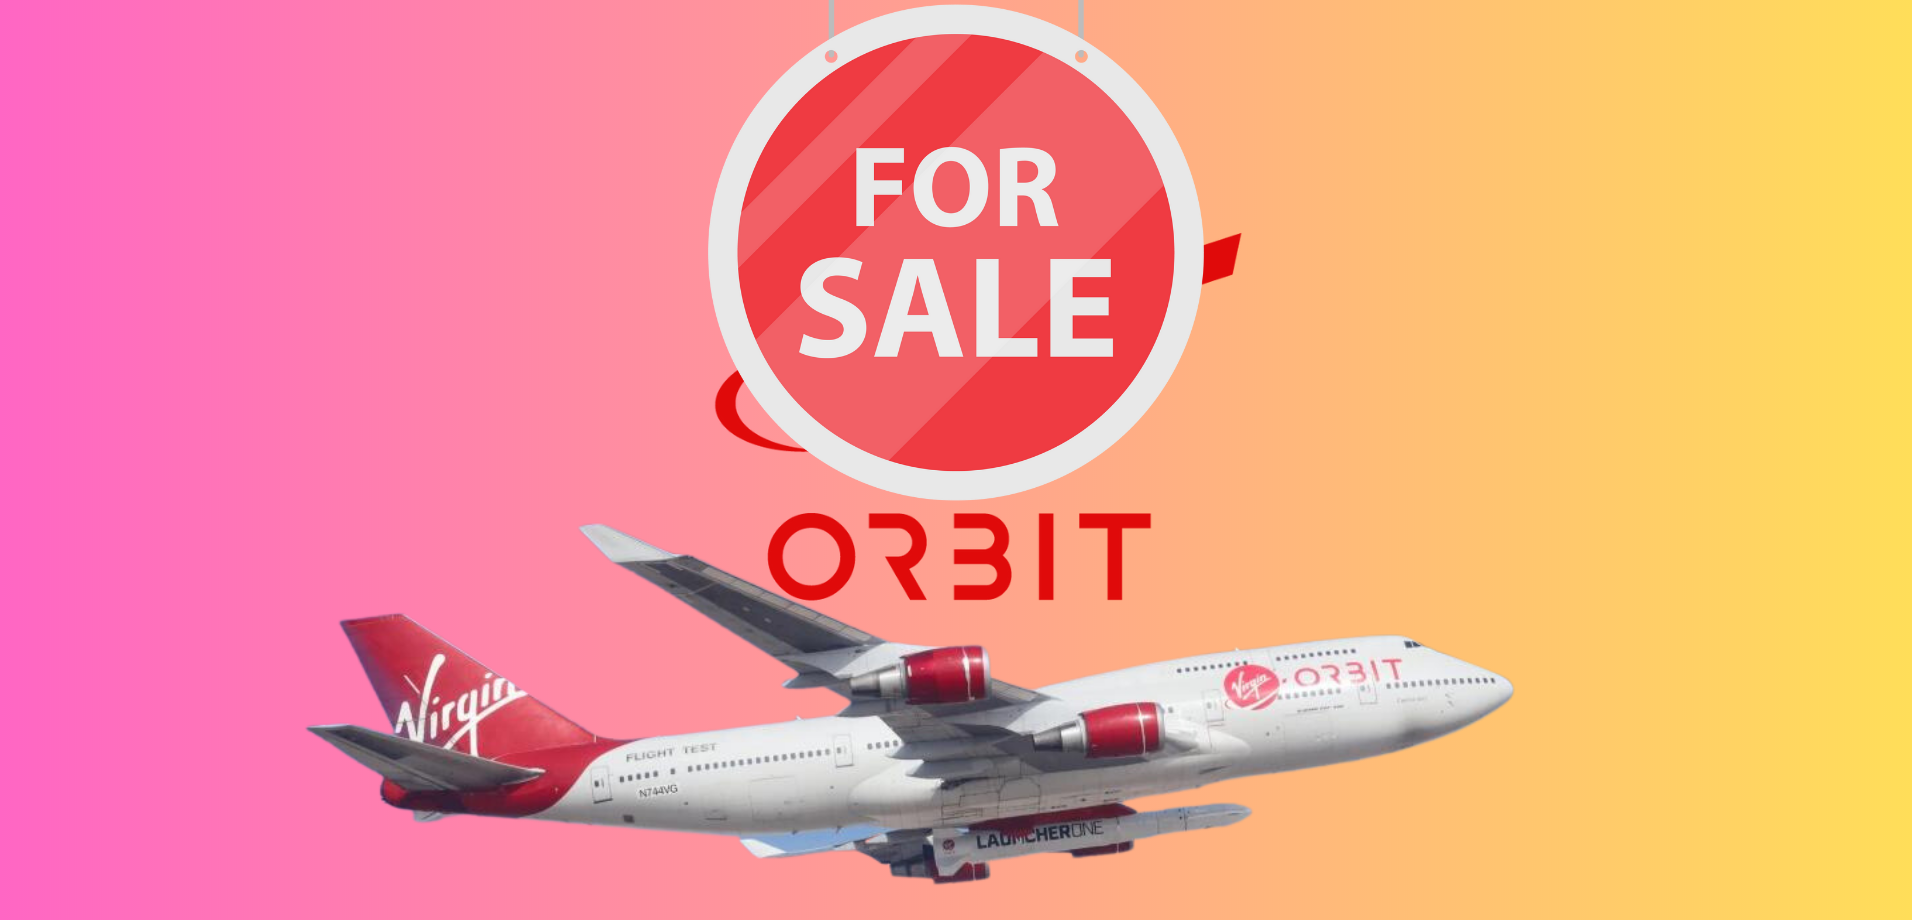 Virgin Orbit Sold Assets to Rocket Lab, Launcher, and Stratolaunch in Bankruptcy Auction